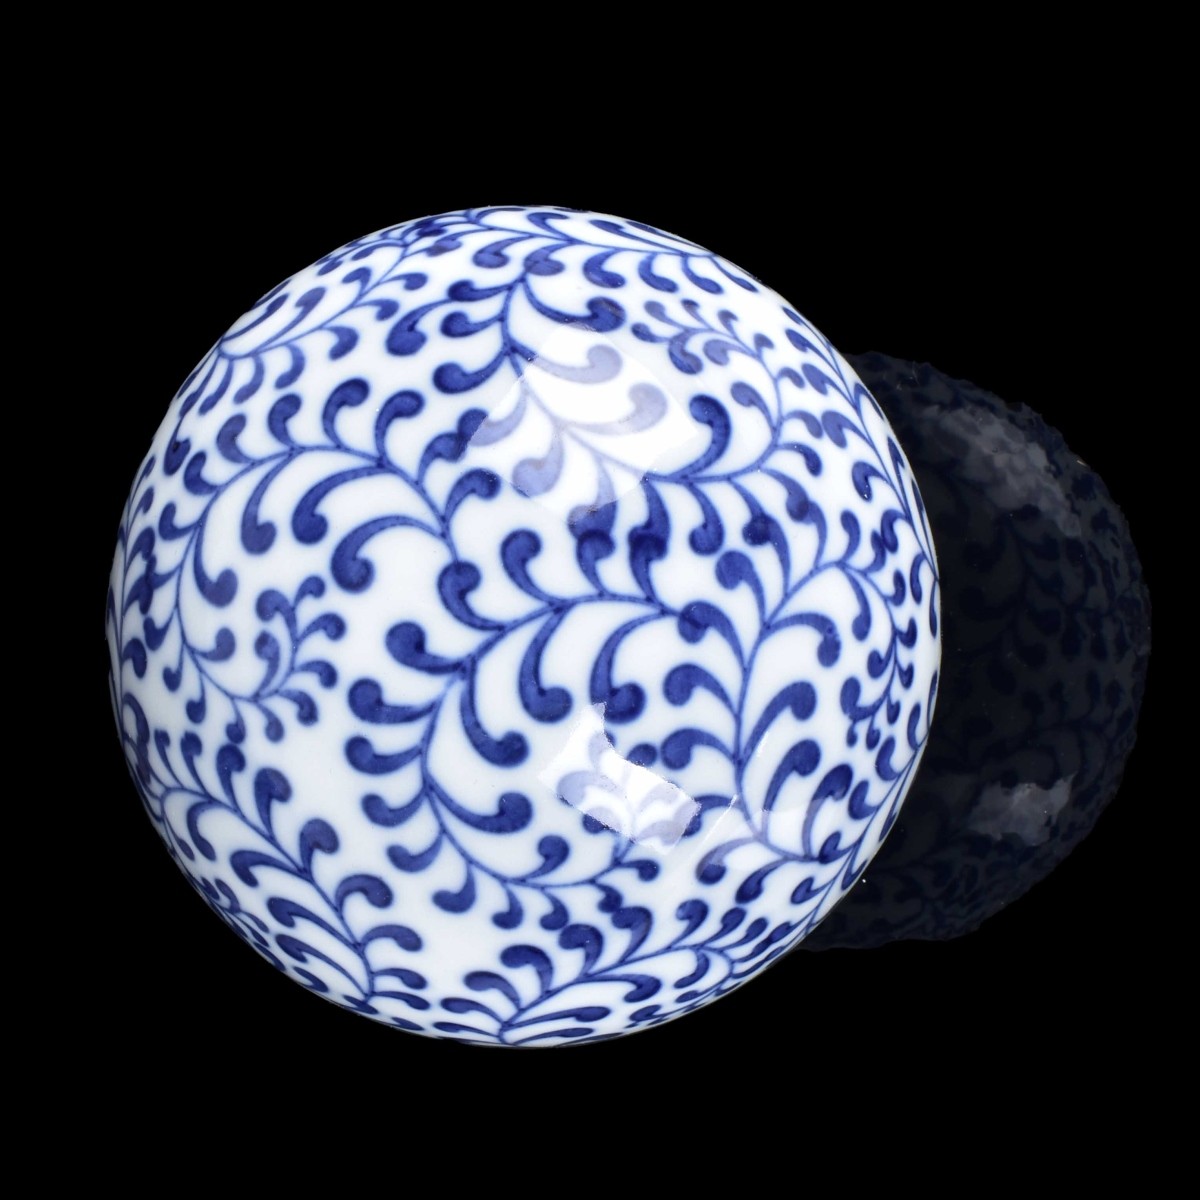 Ming Style Blue and White Porcelain Balls